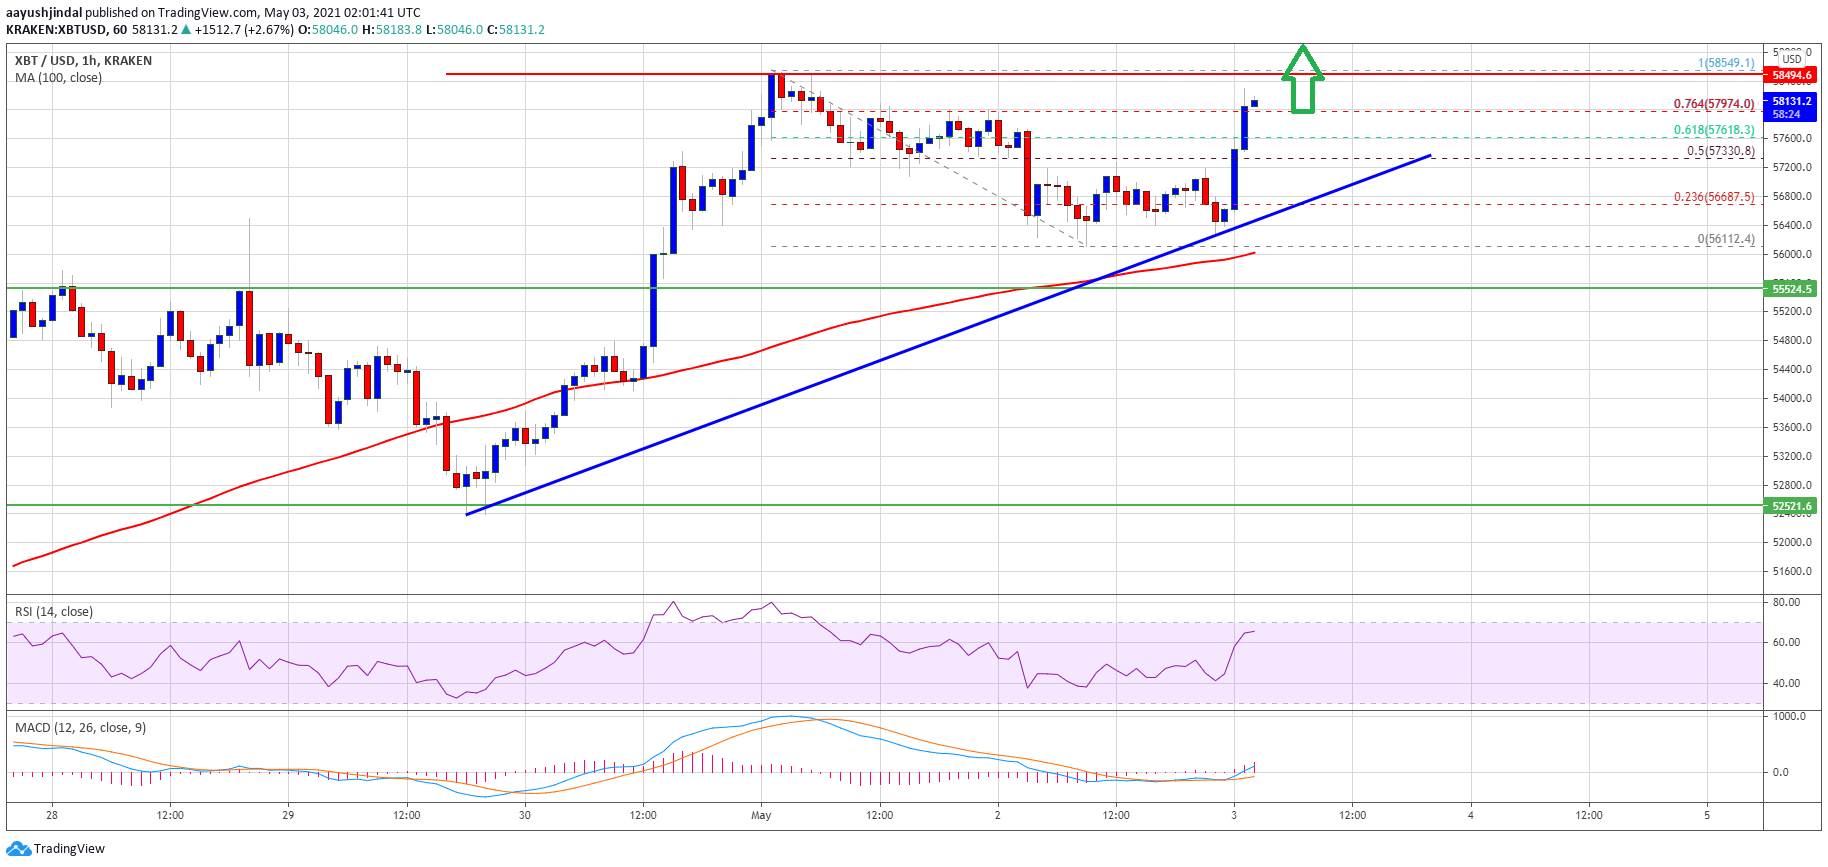 TA: Bitcoin Gains Momentum, Here’s What Could Spark A Major Rally